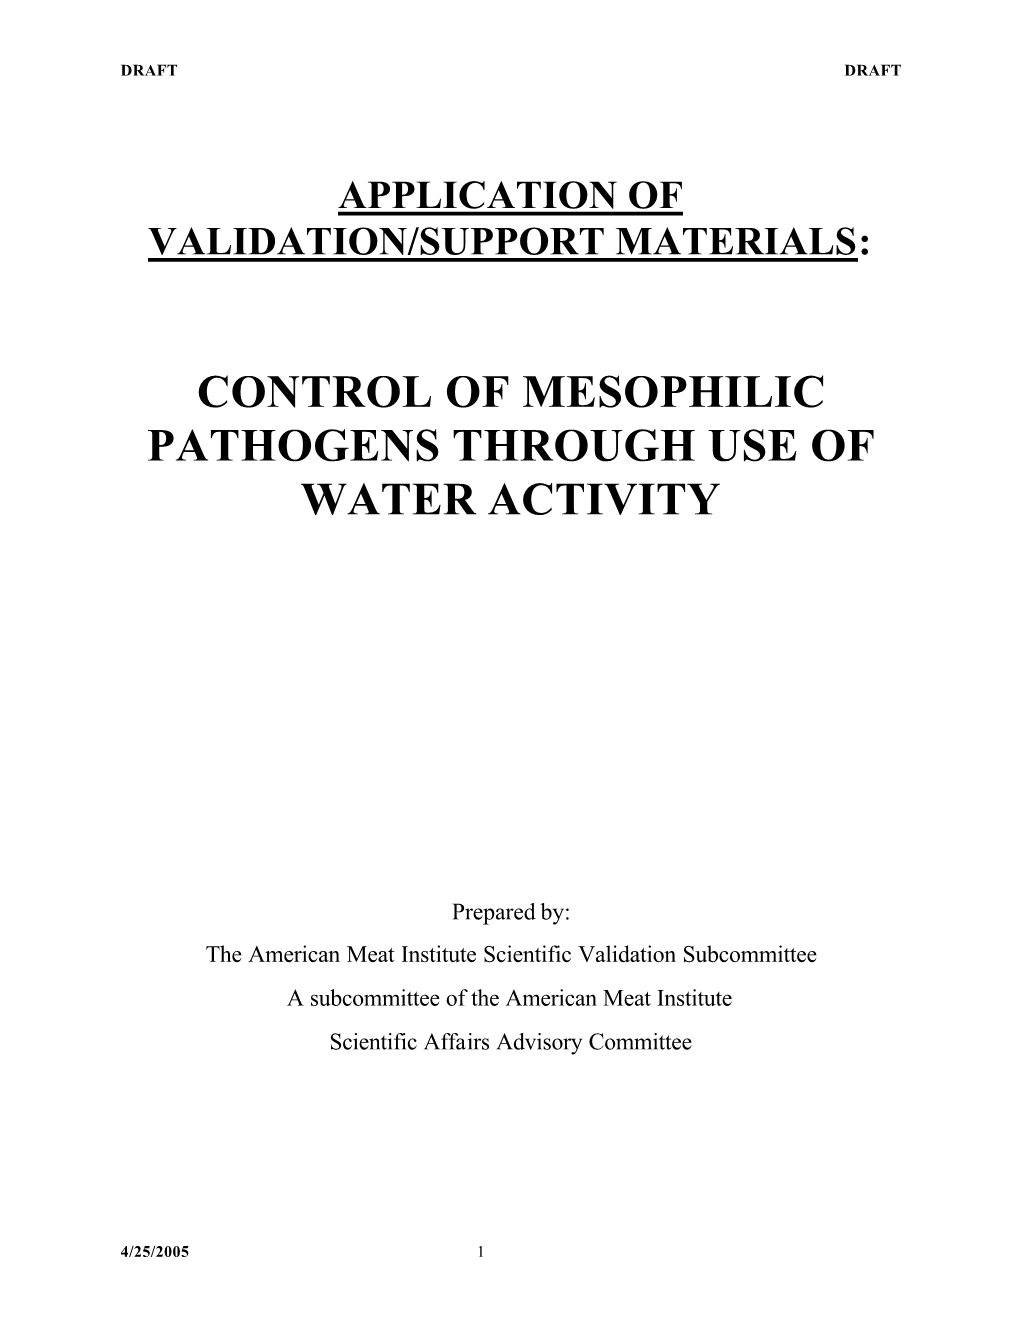 Control of Mesophilic Pathogens Through Use of Water Activity